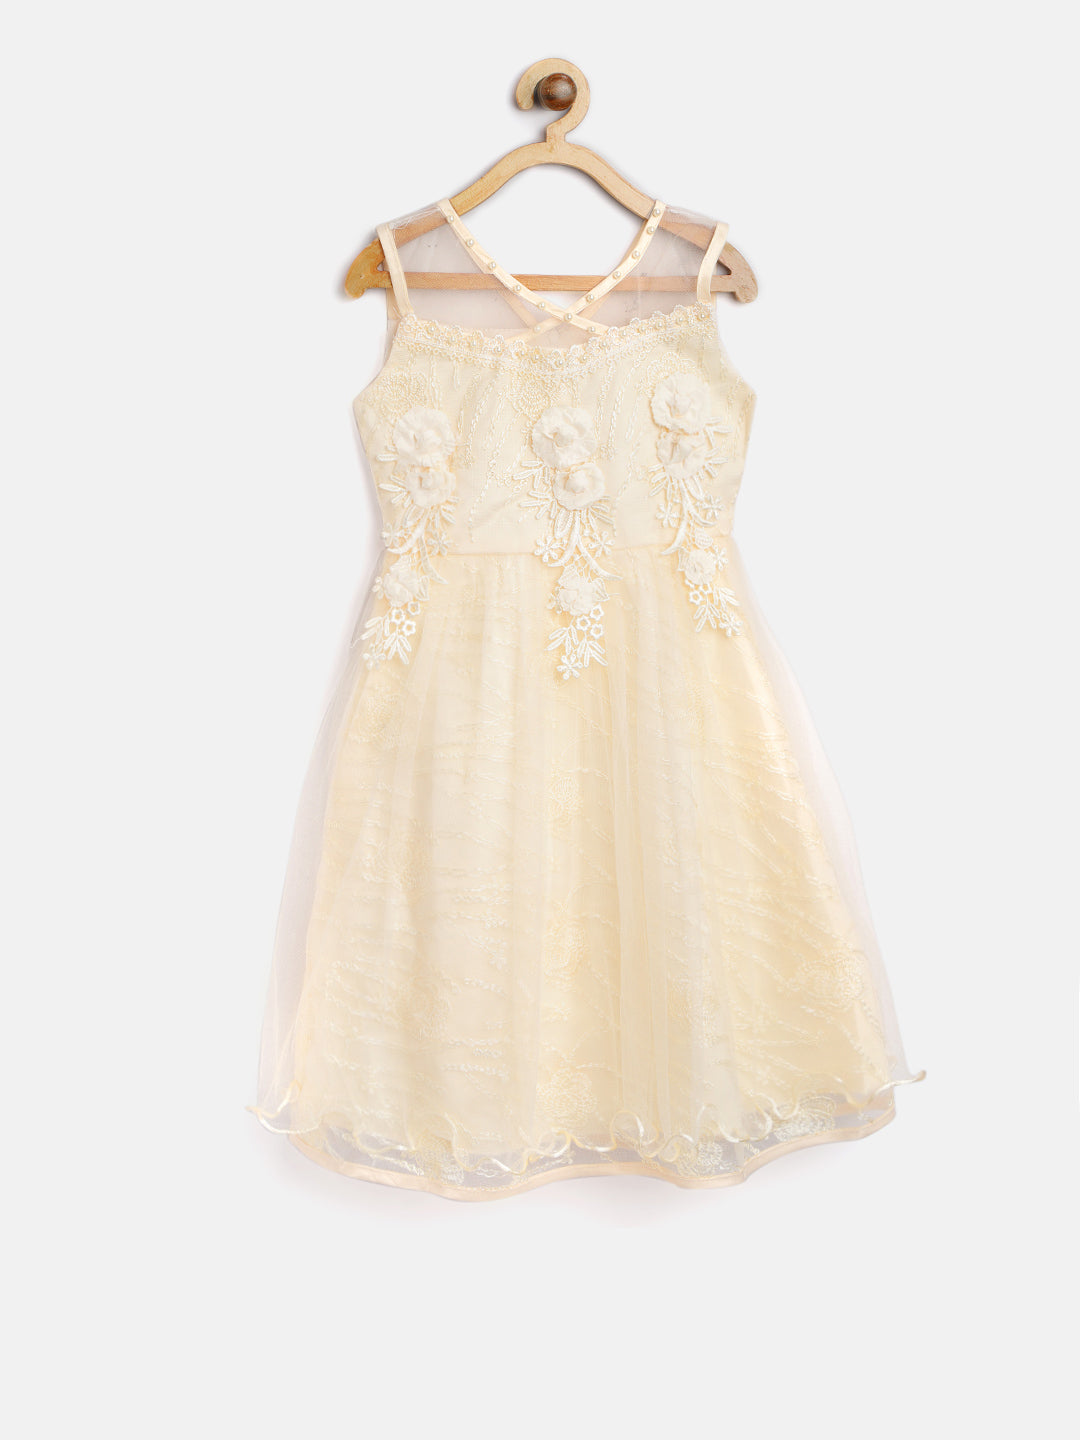 Girls Cream Flowers and Pearls embellished Party Dress